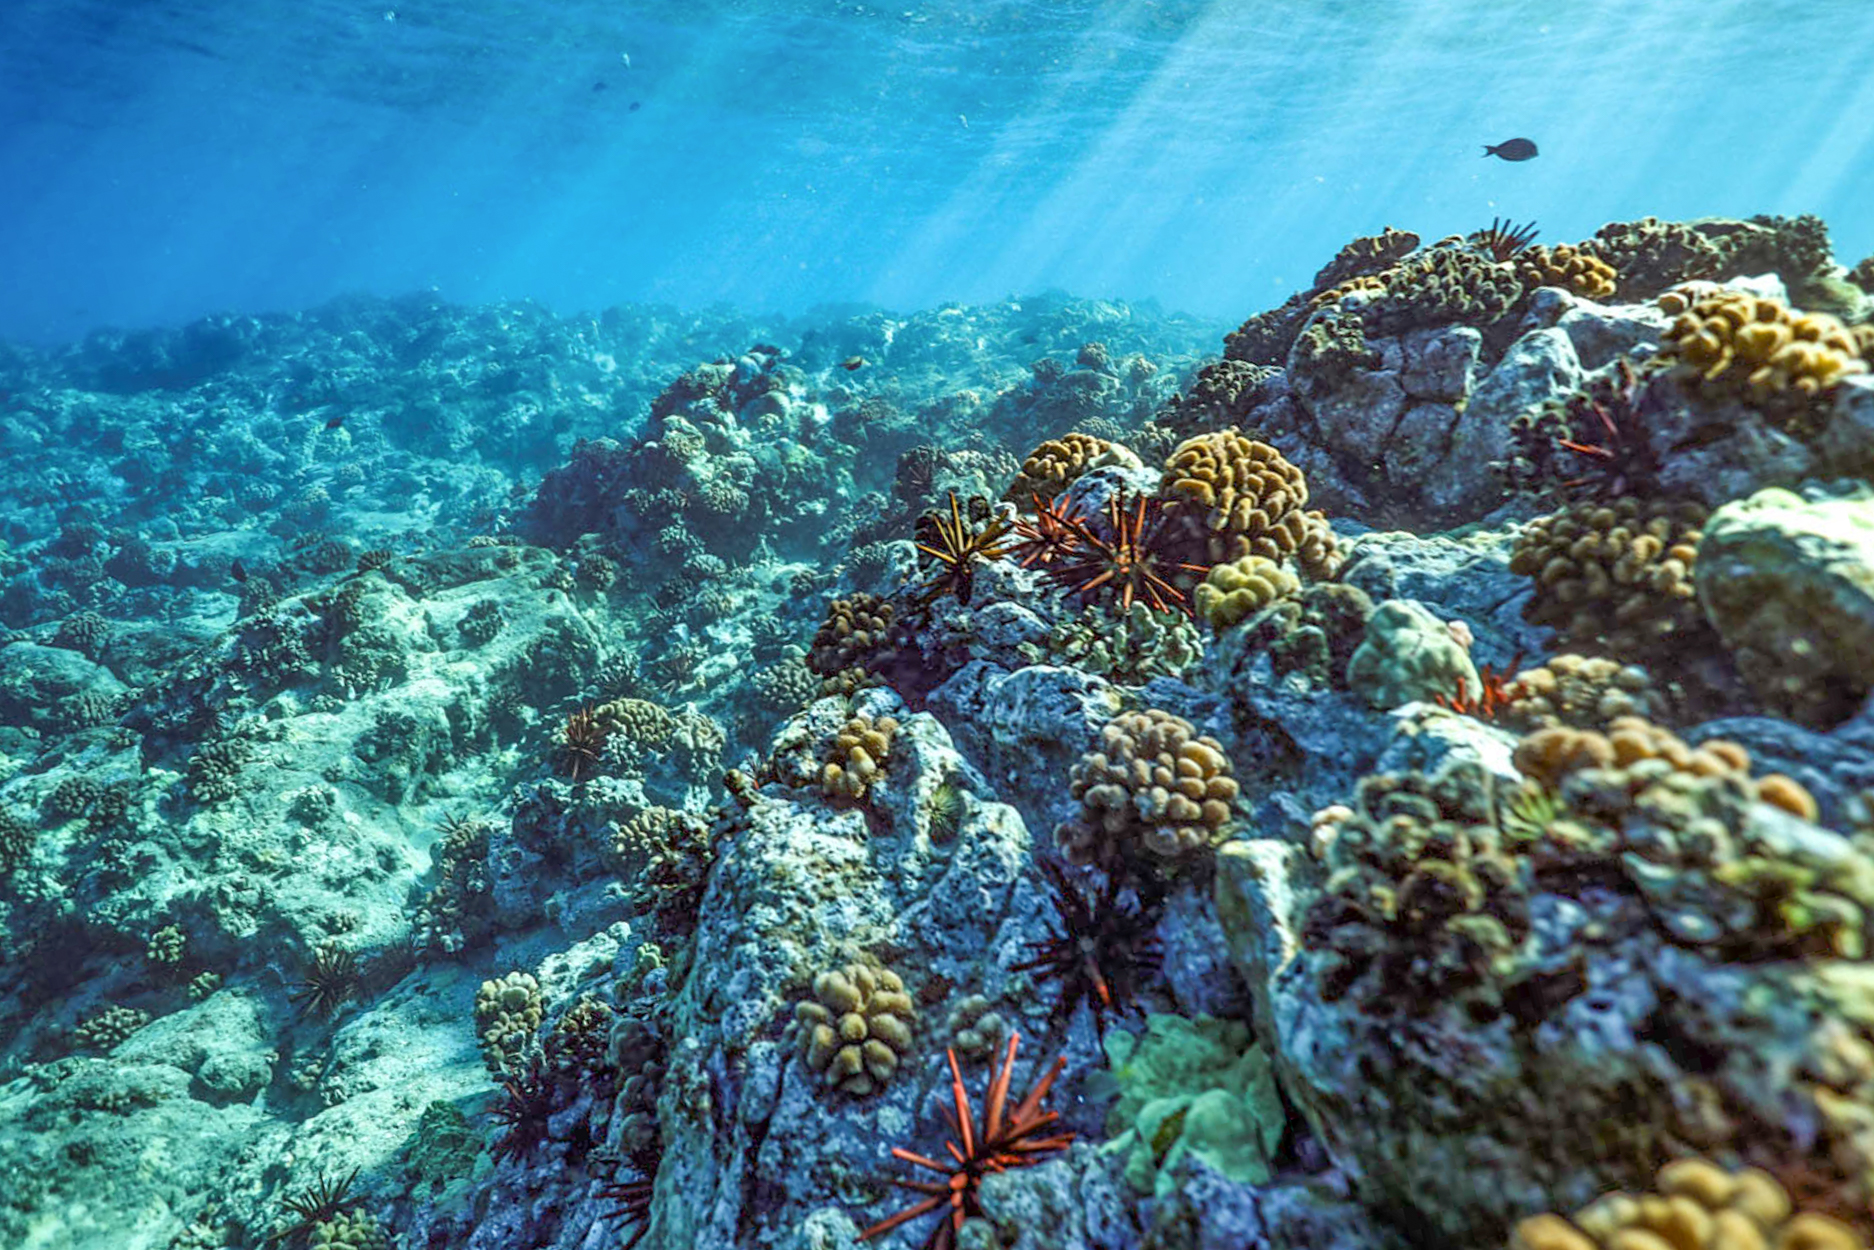 Vibrant reefs filled with marine life surround Hawaii